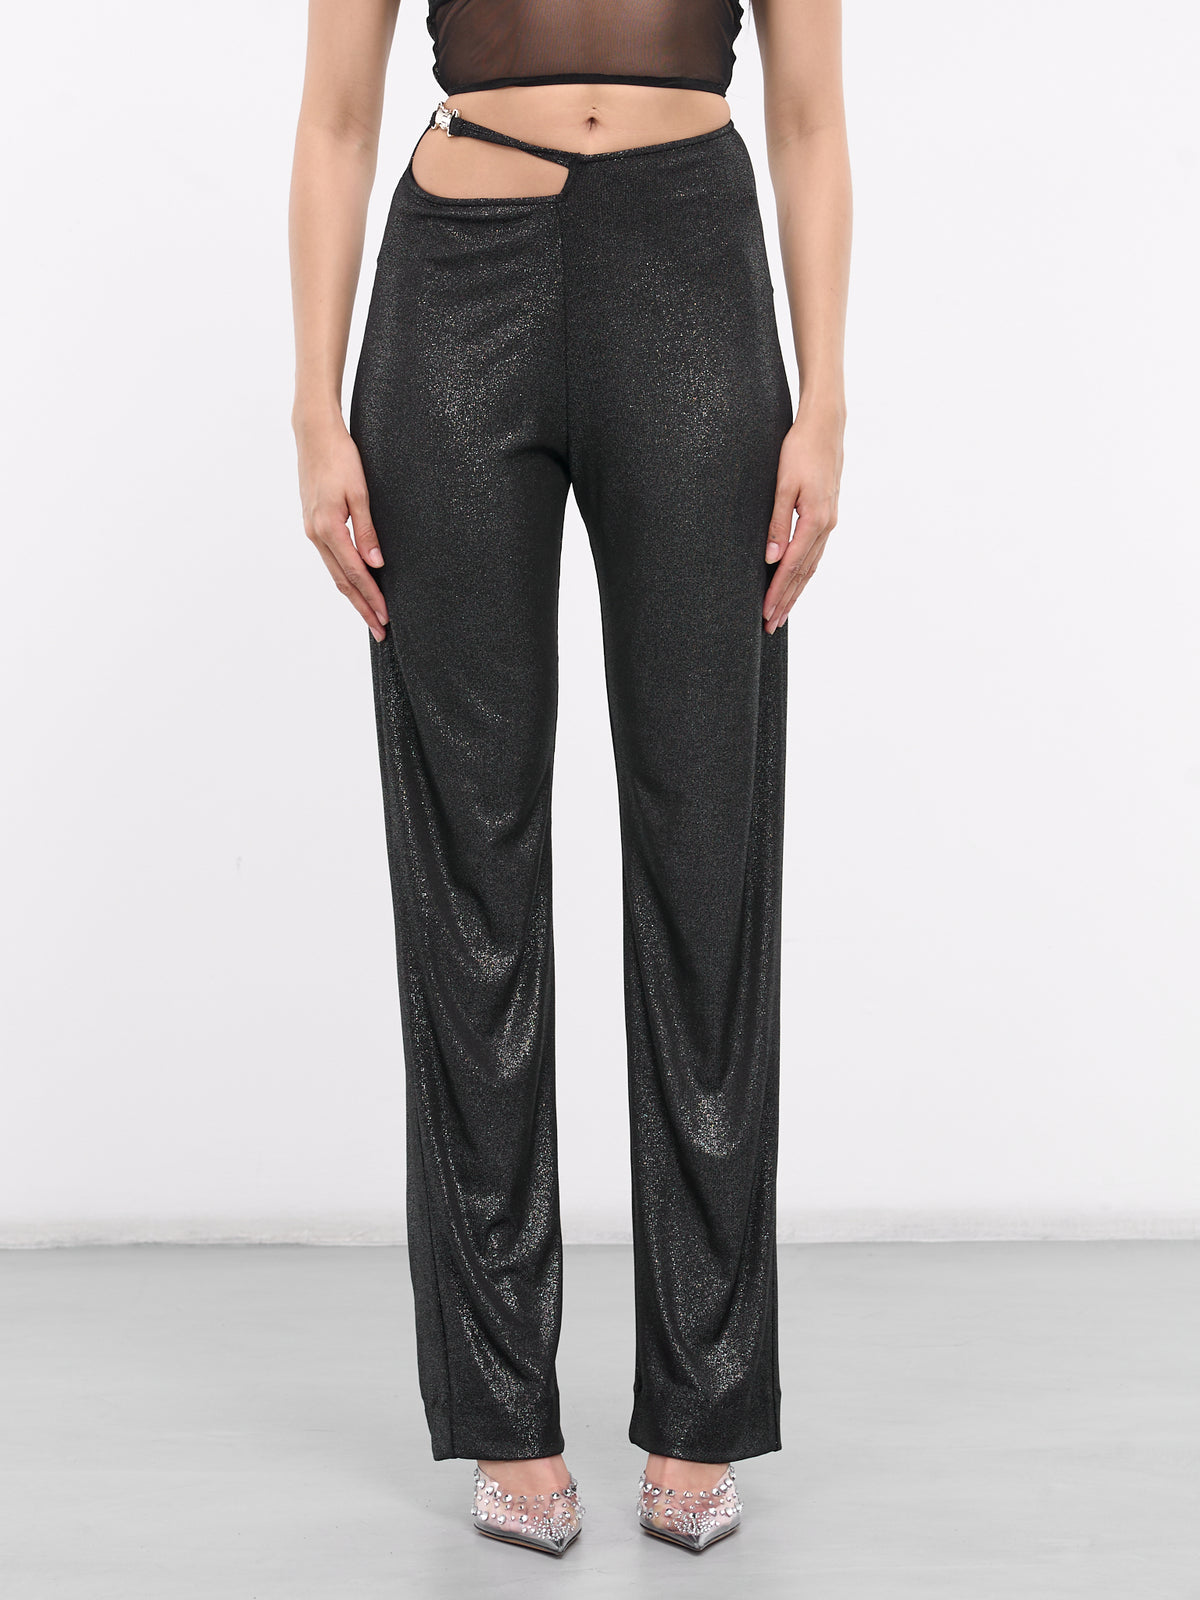 Buckle Low Waist Pants (BLWP-SHIMMER)